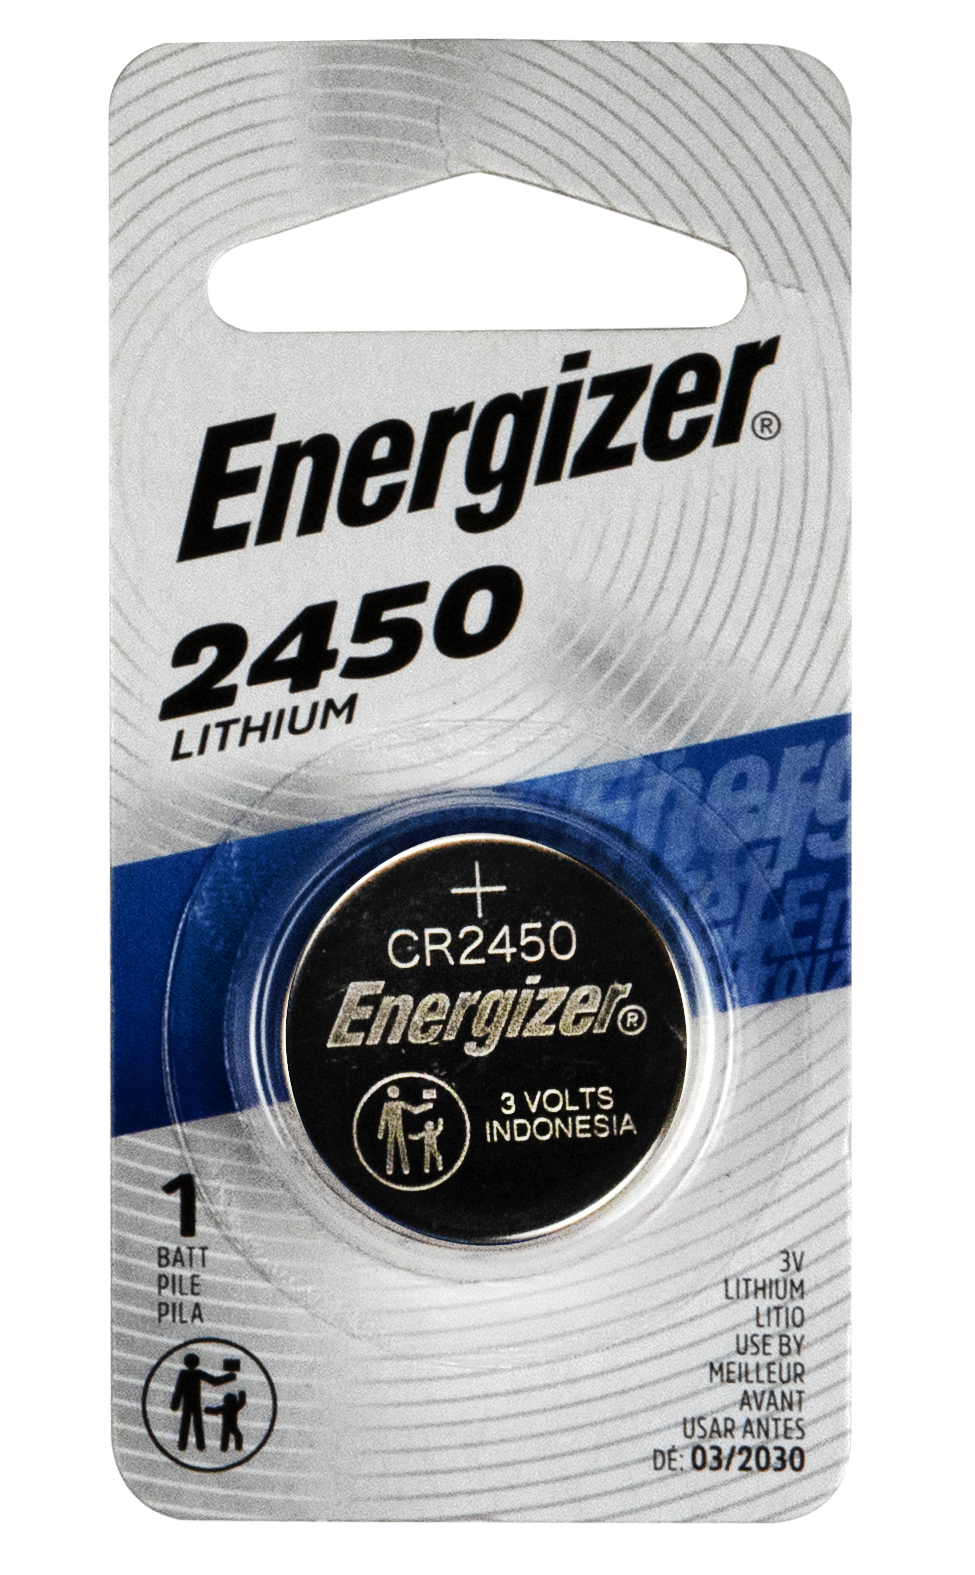 Energizer ® 2450 Battery, 1 Pack